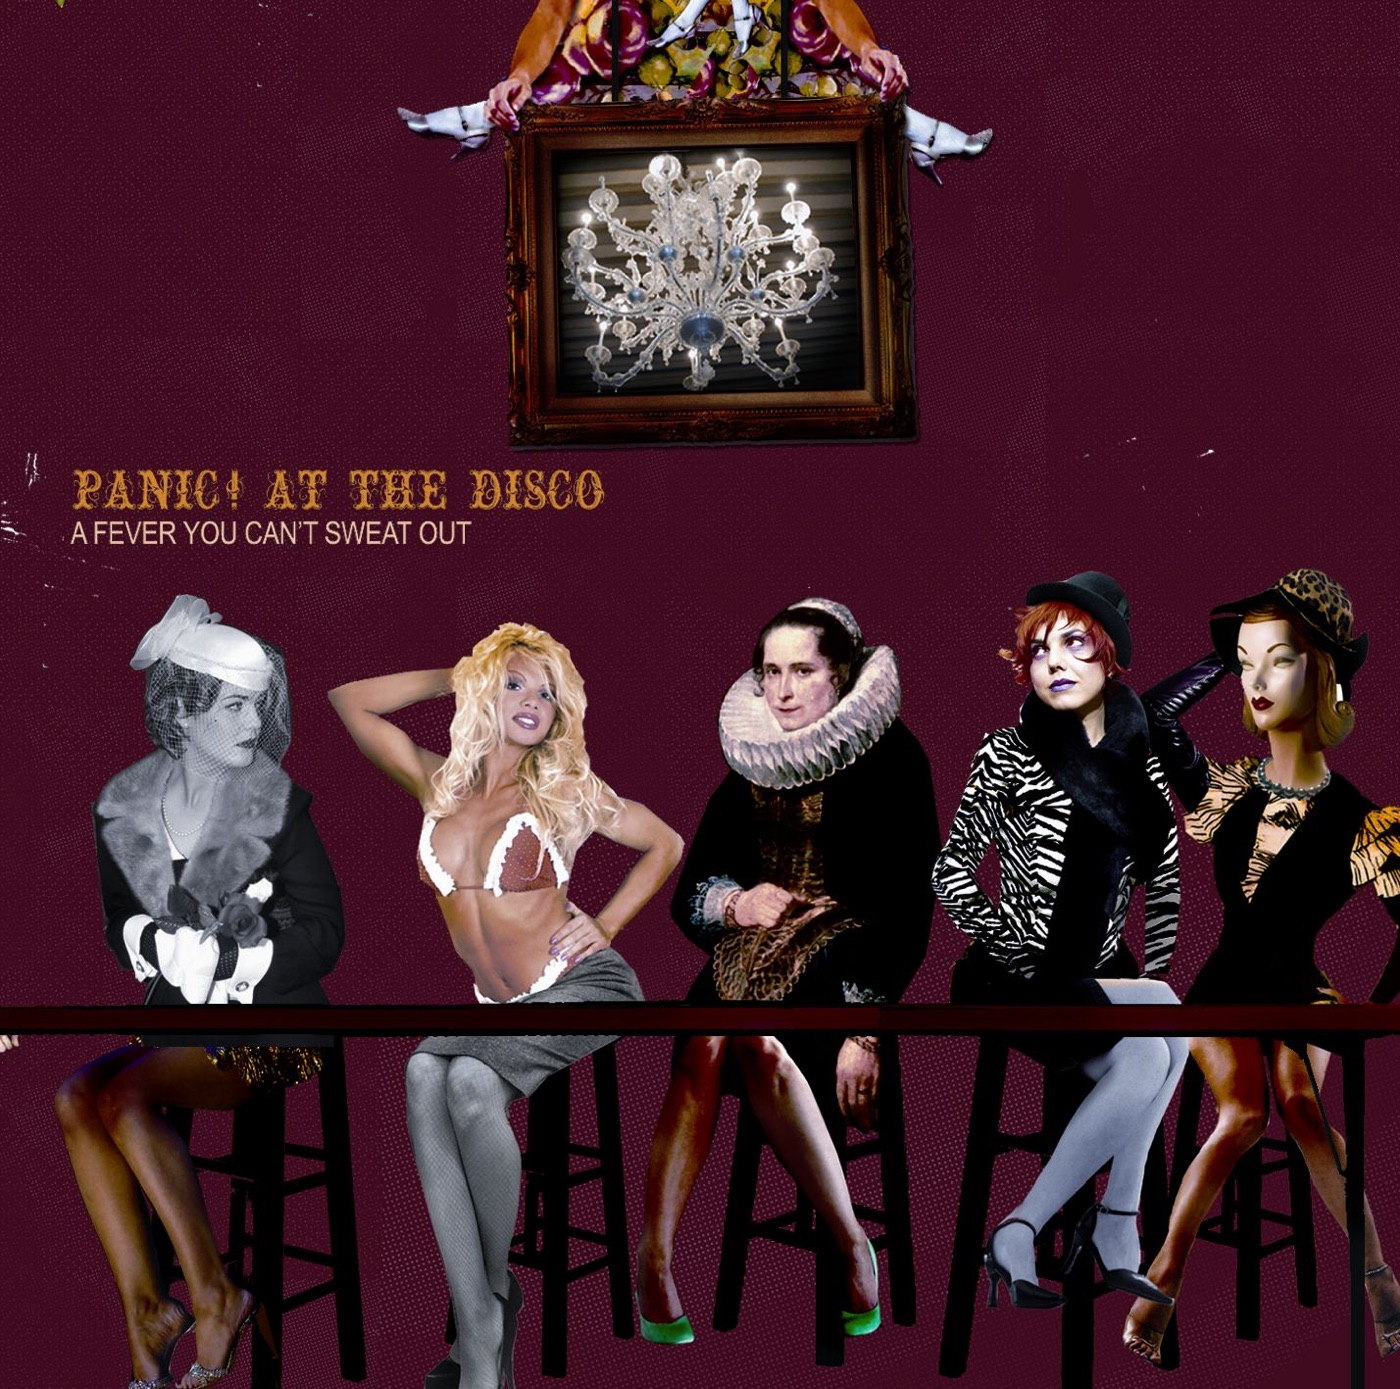 A Fever You Can't Sweat Out by Panic! At The Disco